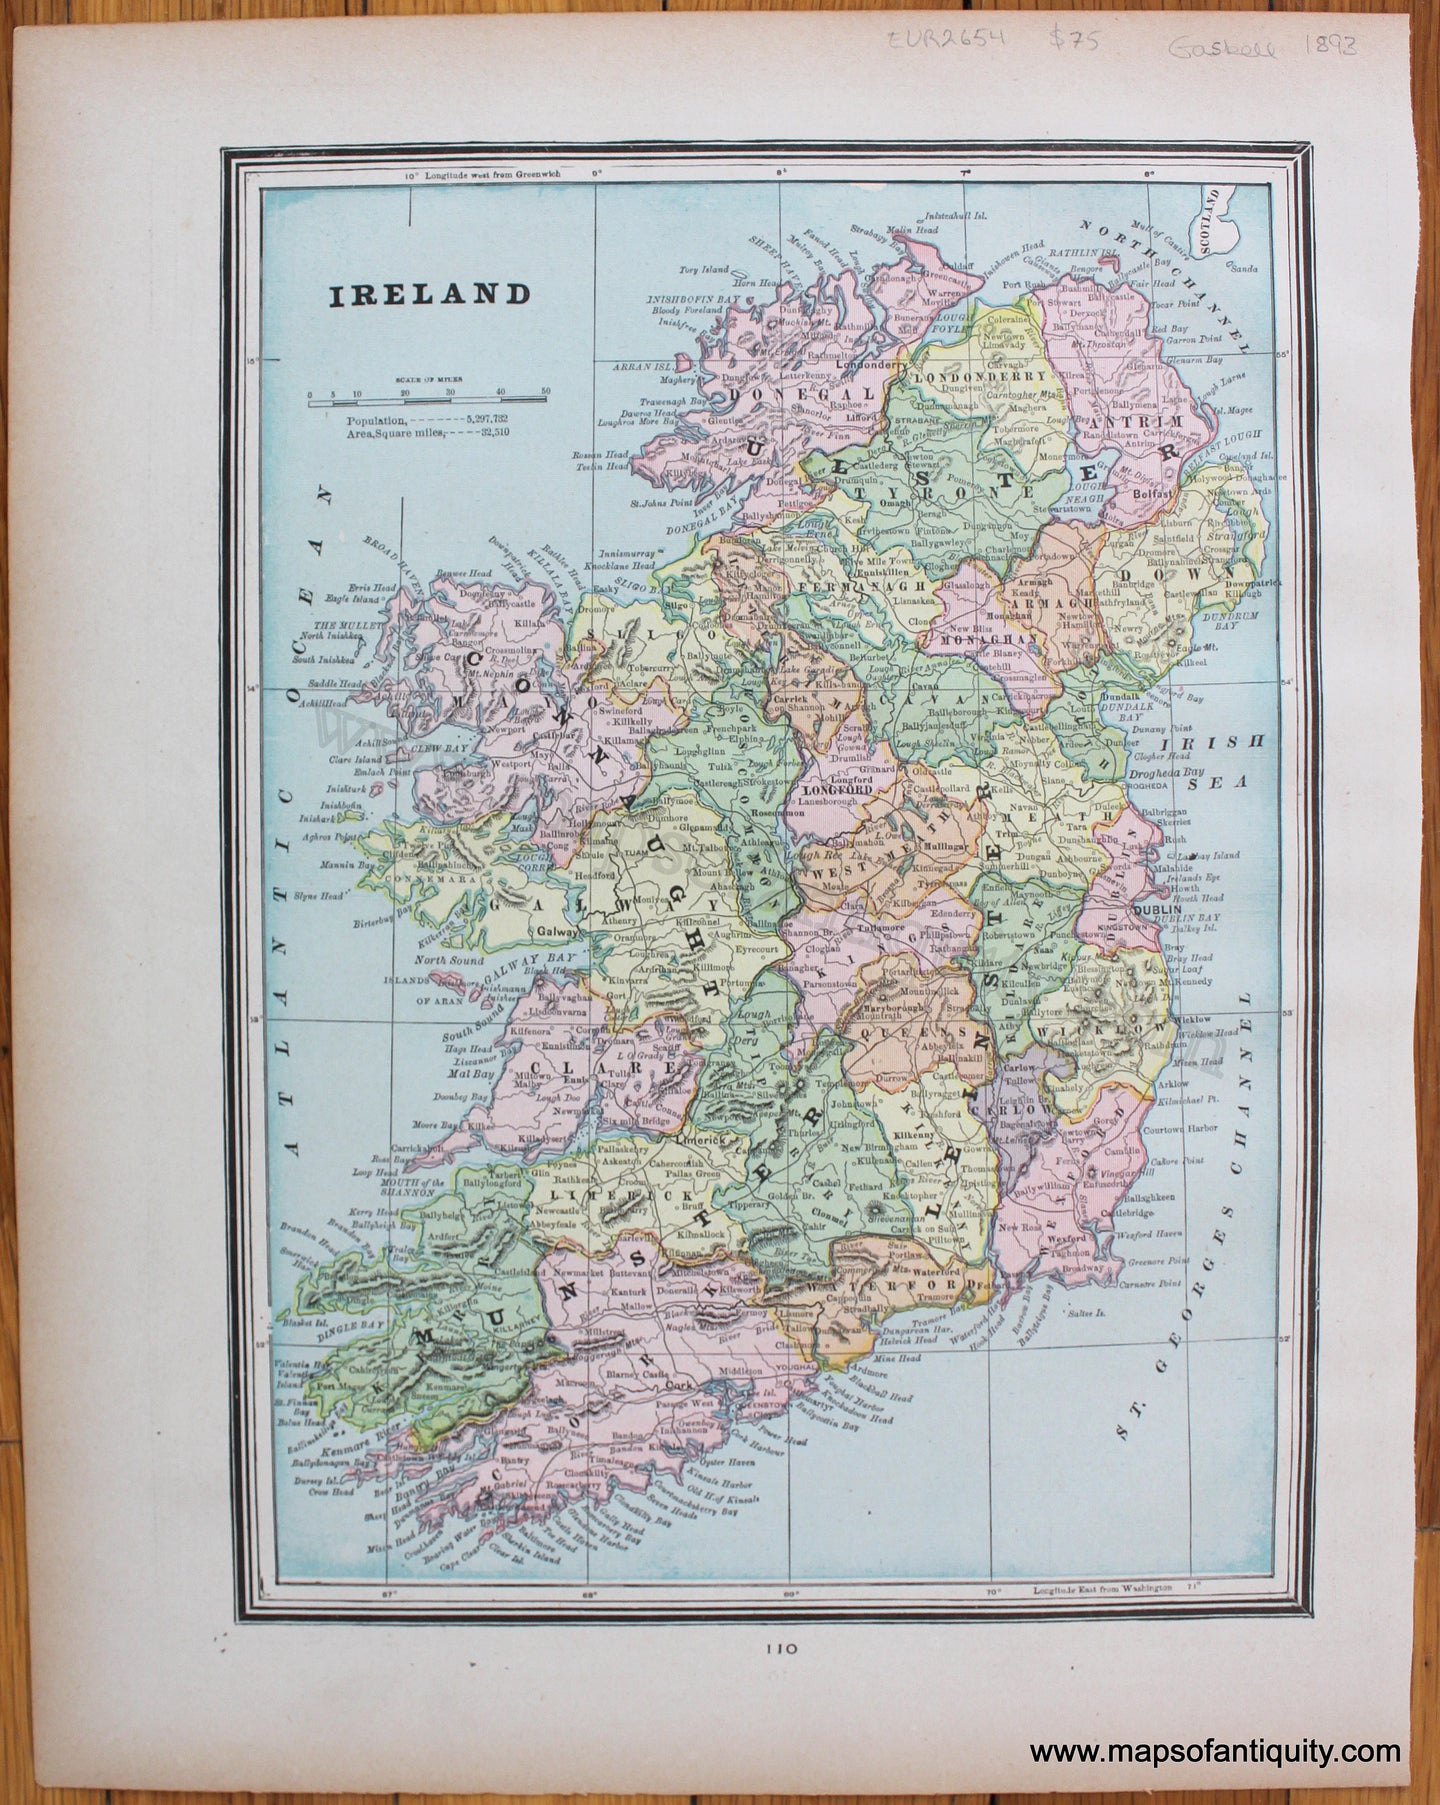 Antique-Printed-Color-Map-Europe-Ireland-verso:-Scotland-1893-Gaskell-Ireland-1800s-19th-century-Maps-of-Antiquity